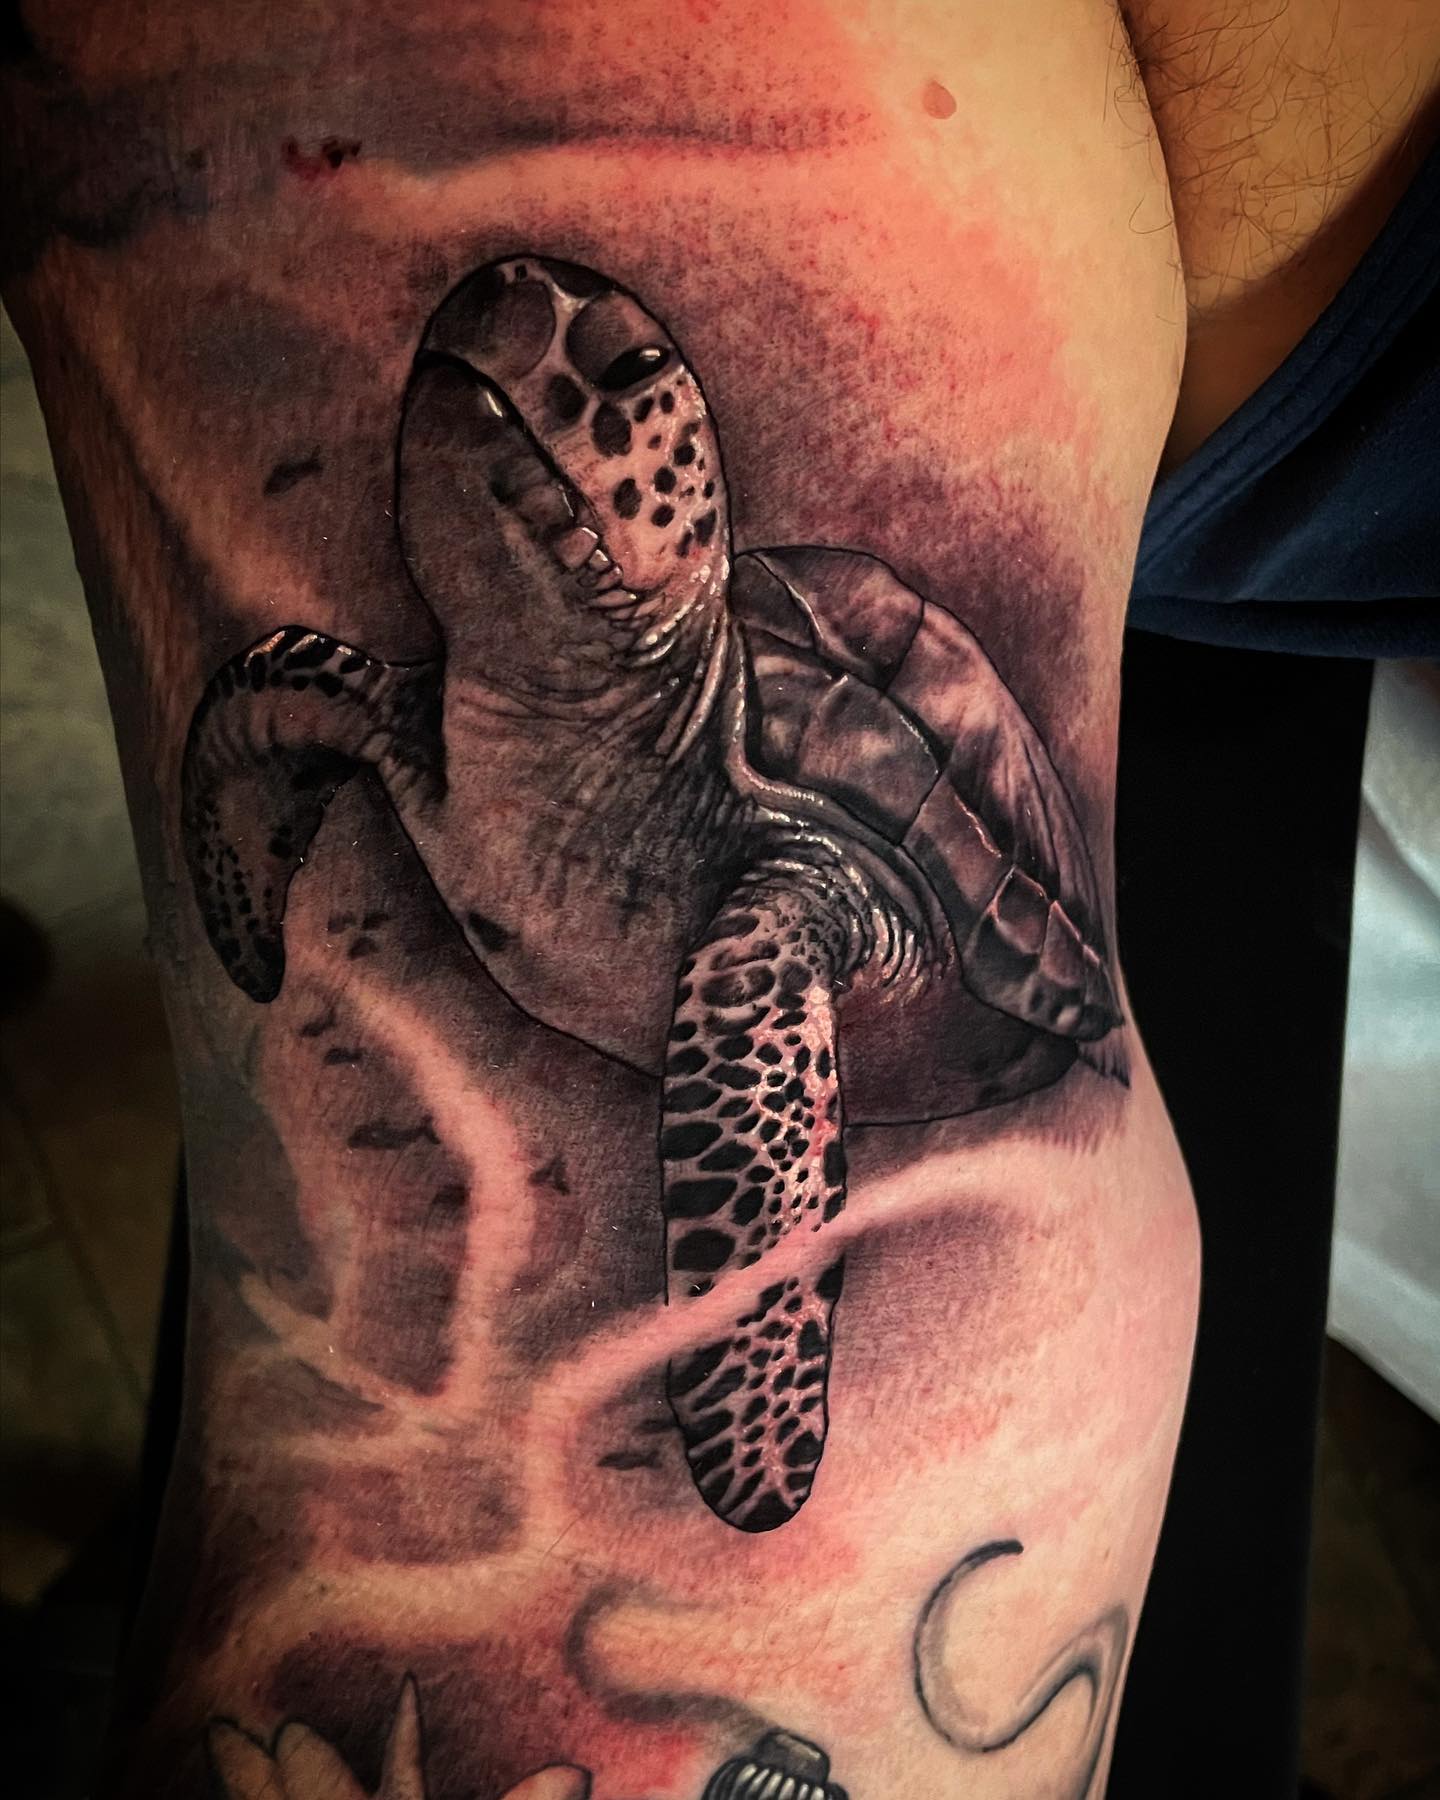 Using the blackwork technique to create a sea turtle tattoo is a nice idea. The shading, in particular, is really impressive. The turtle above looks like it's swimming in an ocean, which is a great way to express your love for water.